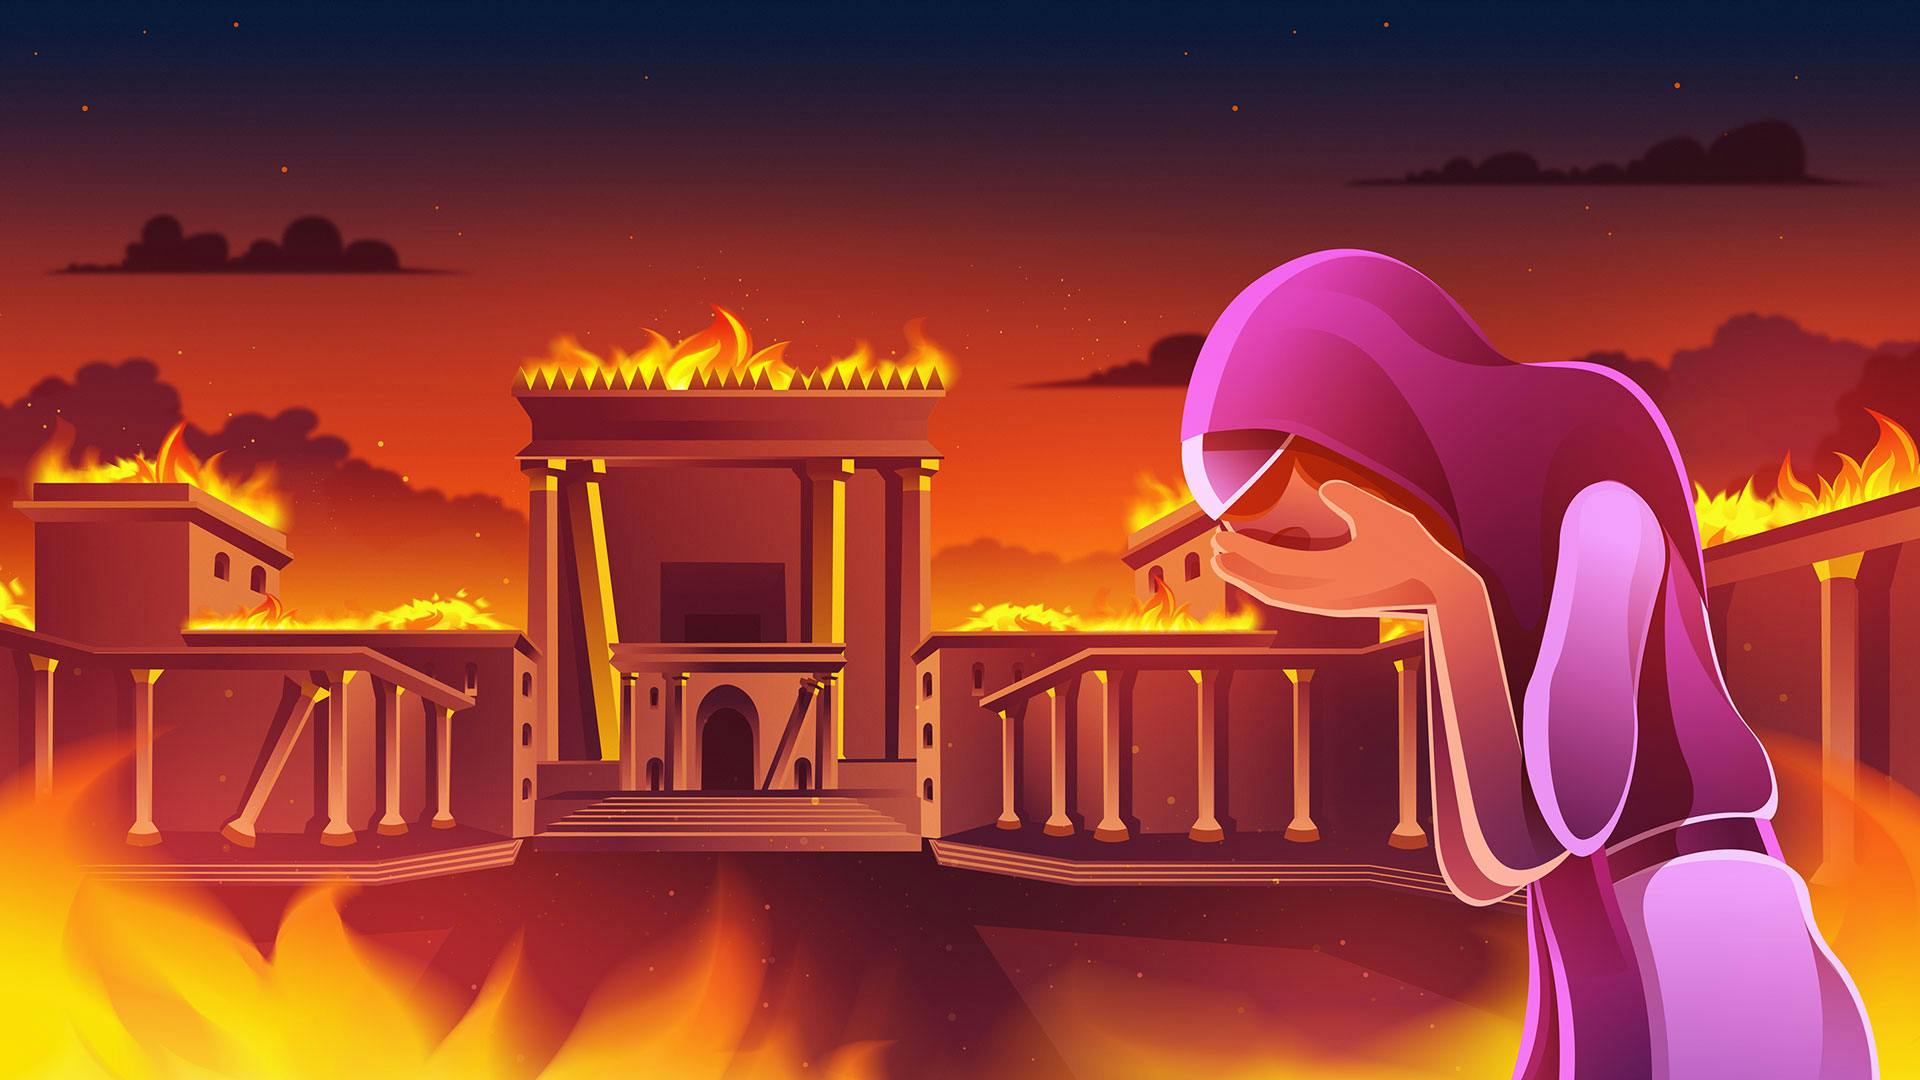 An illustrated graphic of the Temple with flames on the roof. Rachel stands in the foreground crying. She is wearing a pink dress and headscarf.